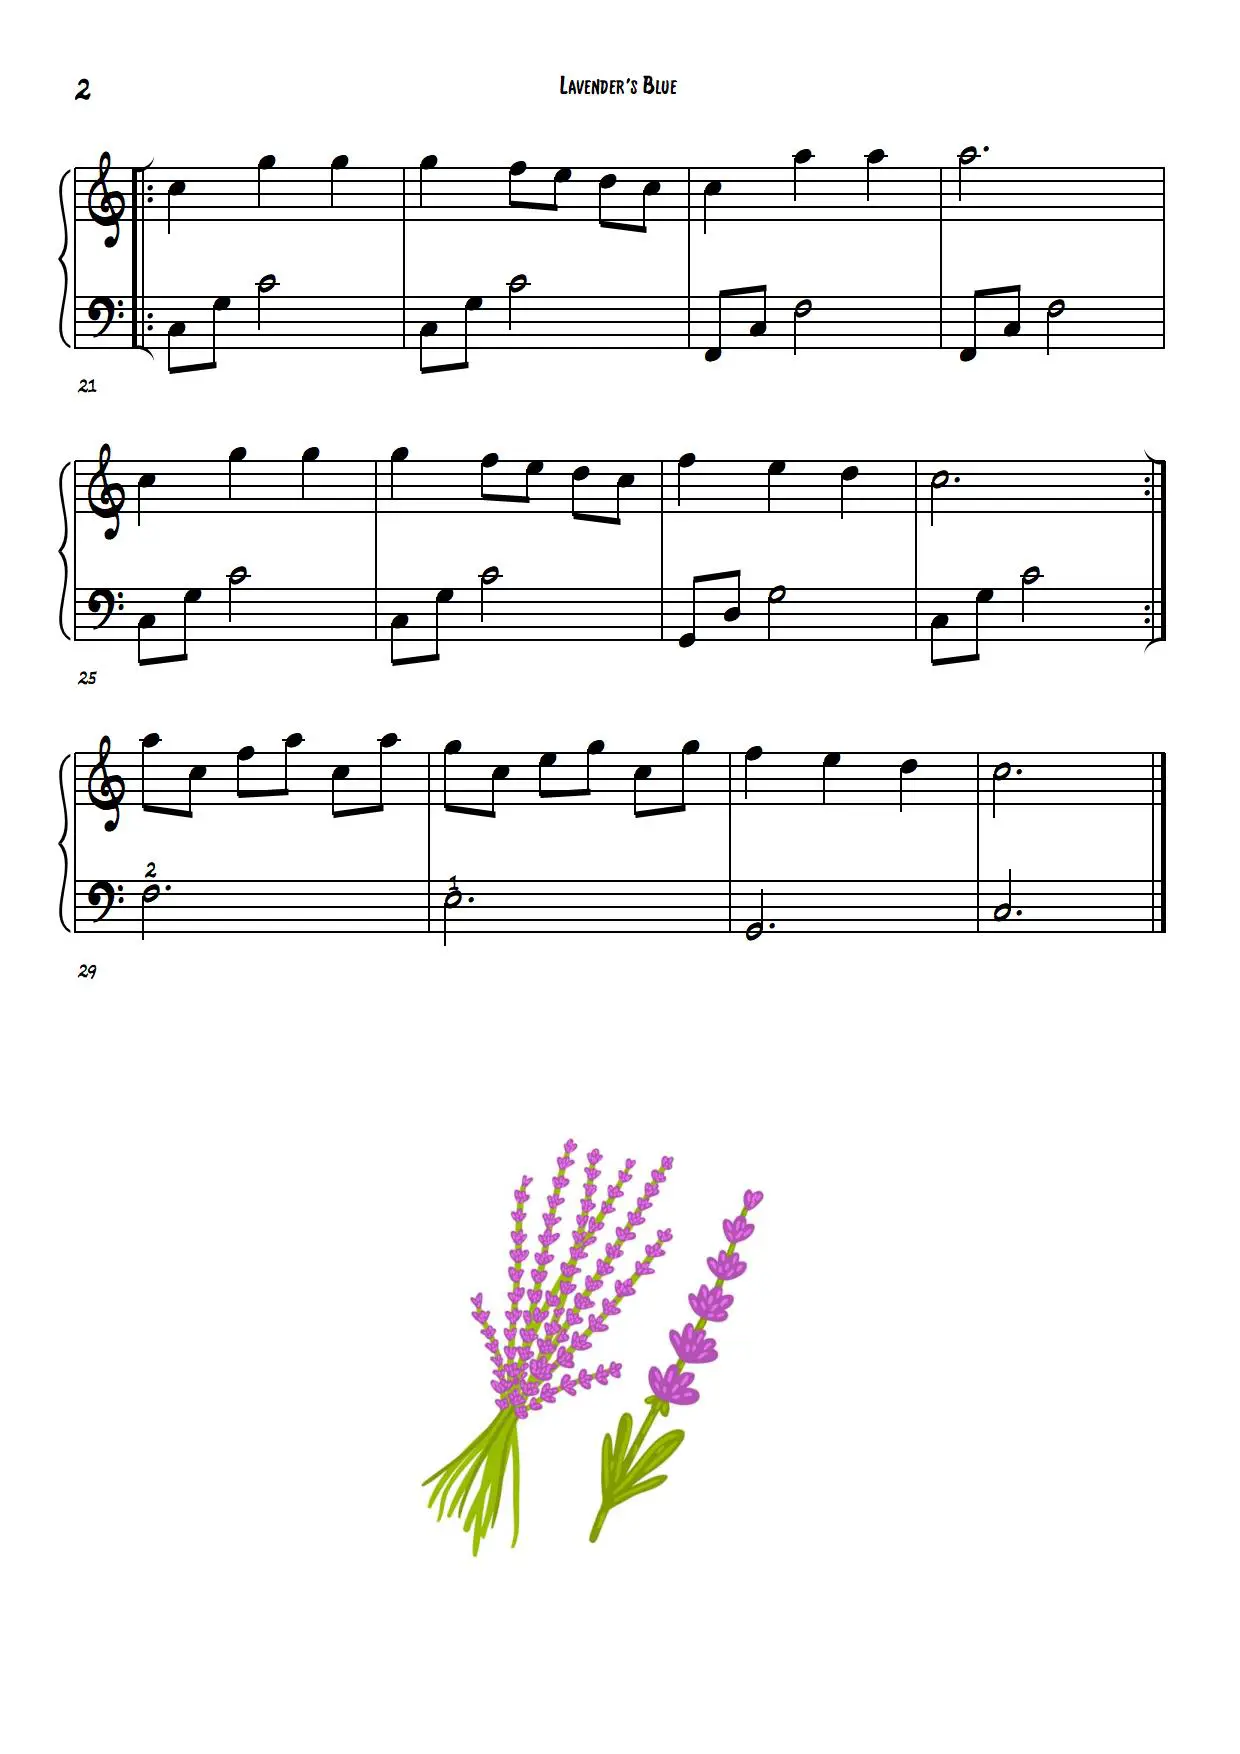 Lavender's Blue easy piano sheet music notes beginners pdf p.2